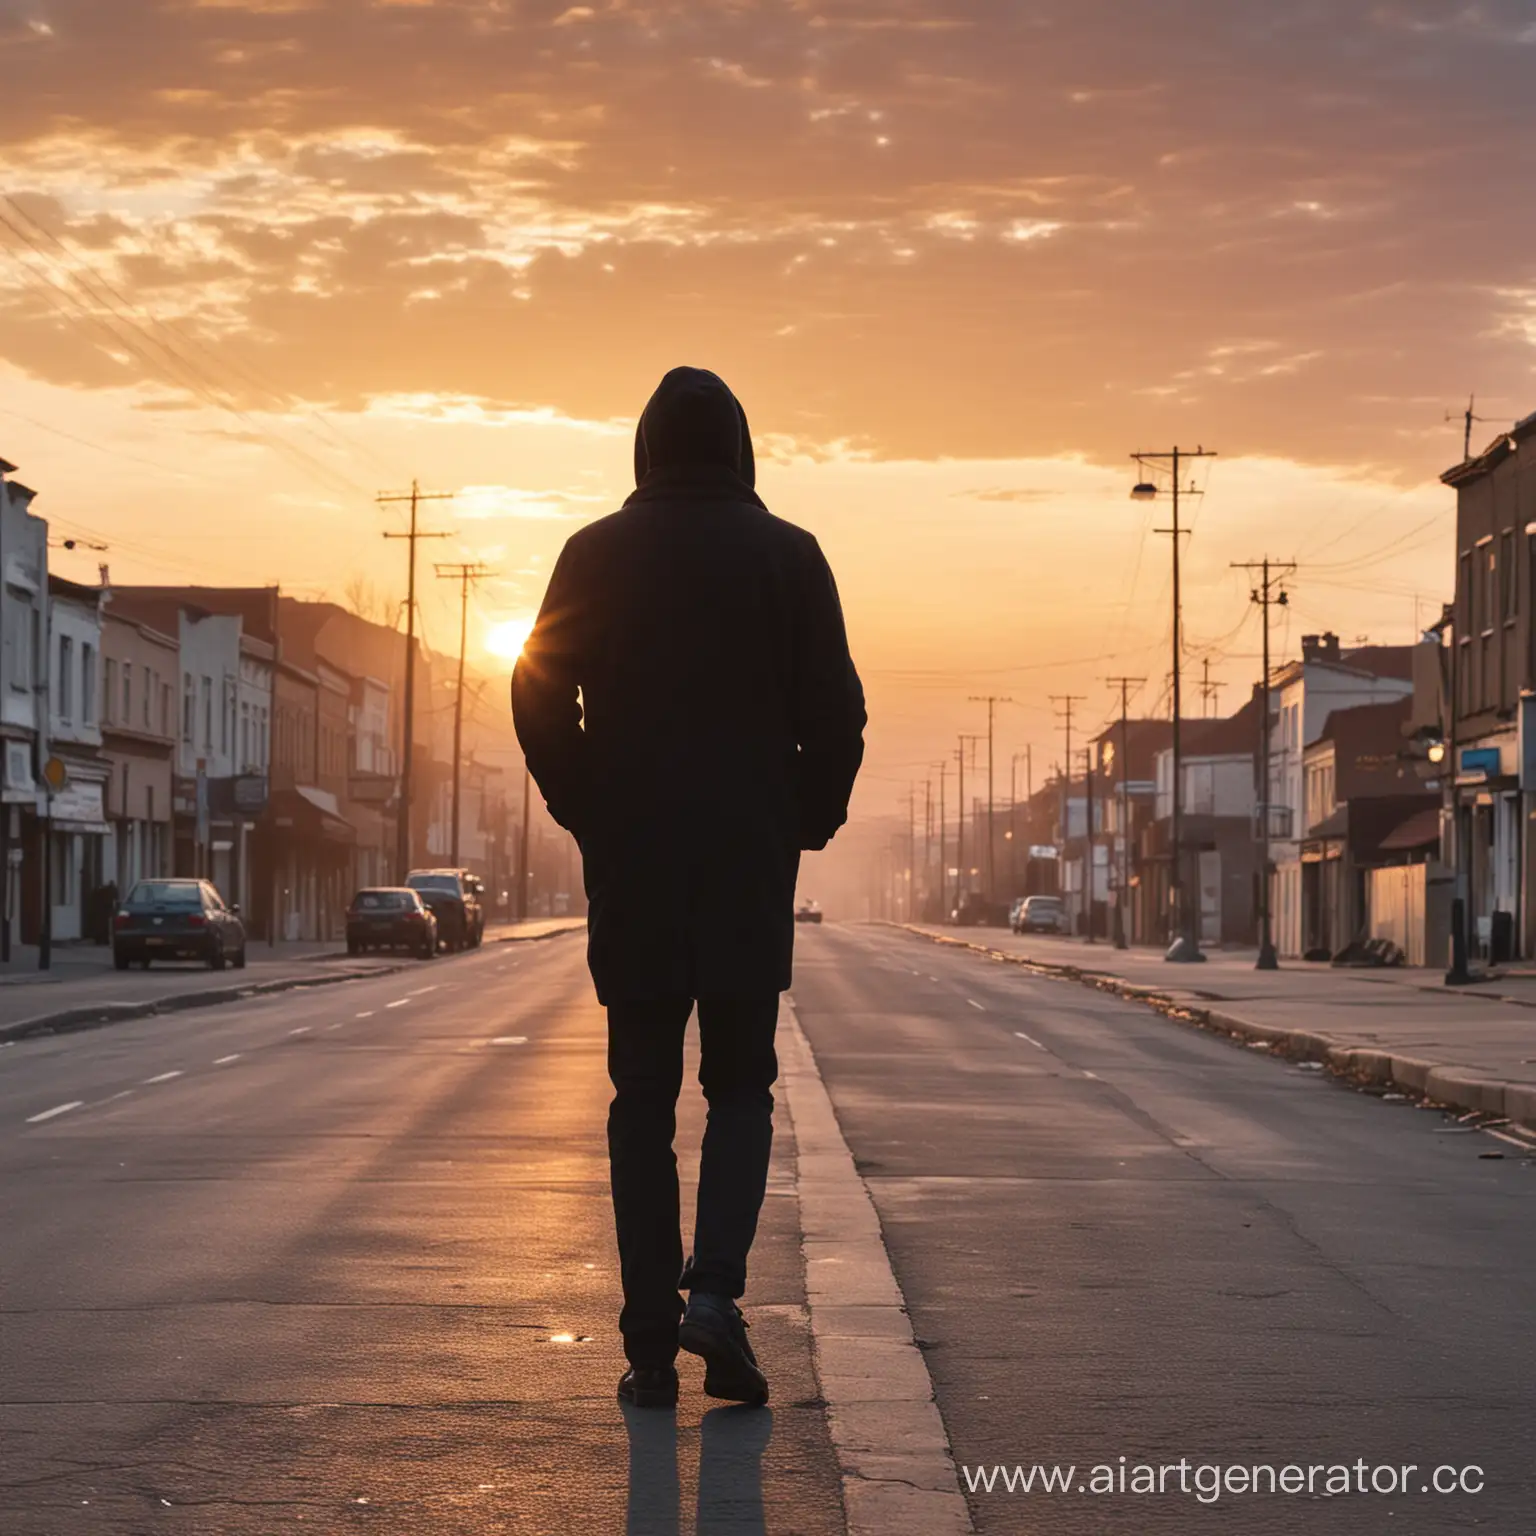 A man with no visible face walks down the street and smokes a cigarette against the background of the sunset